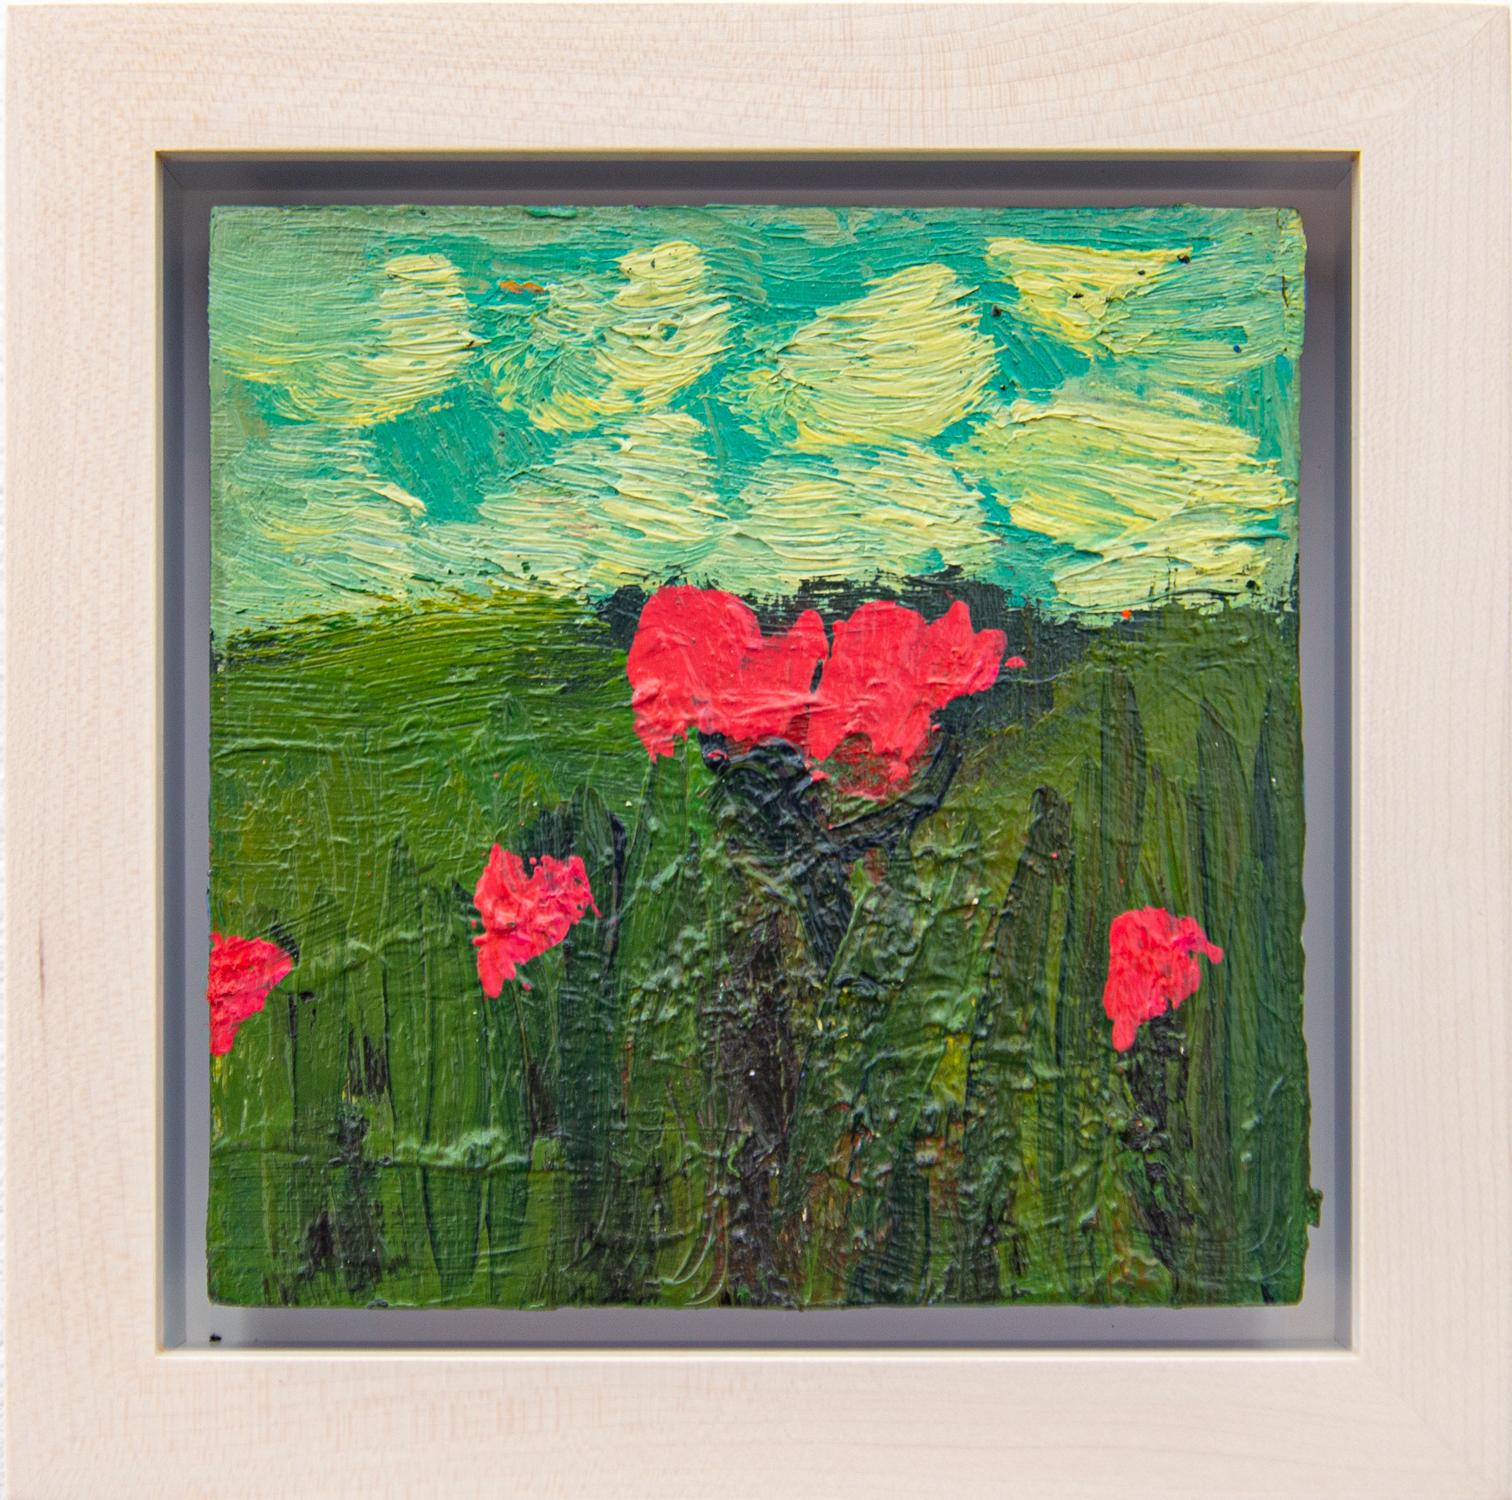 Red Flowers in Landscape - small, pink, green, floral, still life, oil on panel - Contemporary Painting by Jennifer Hornyak